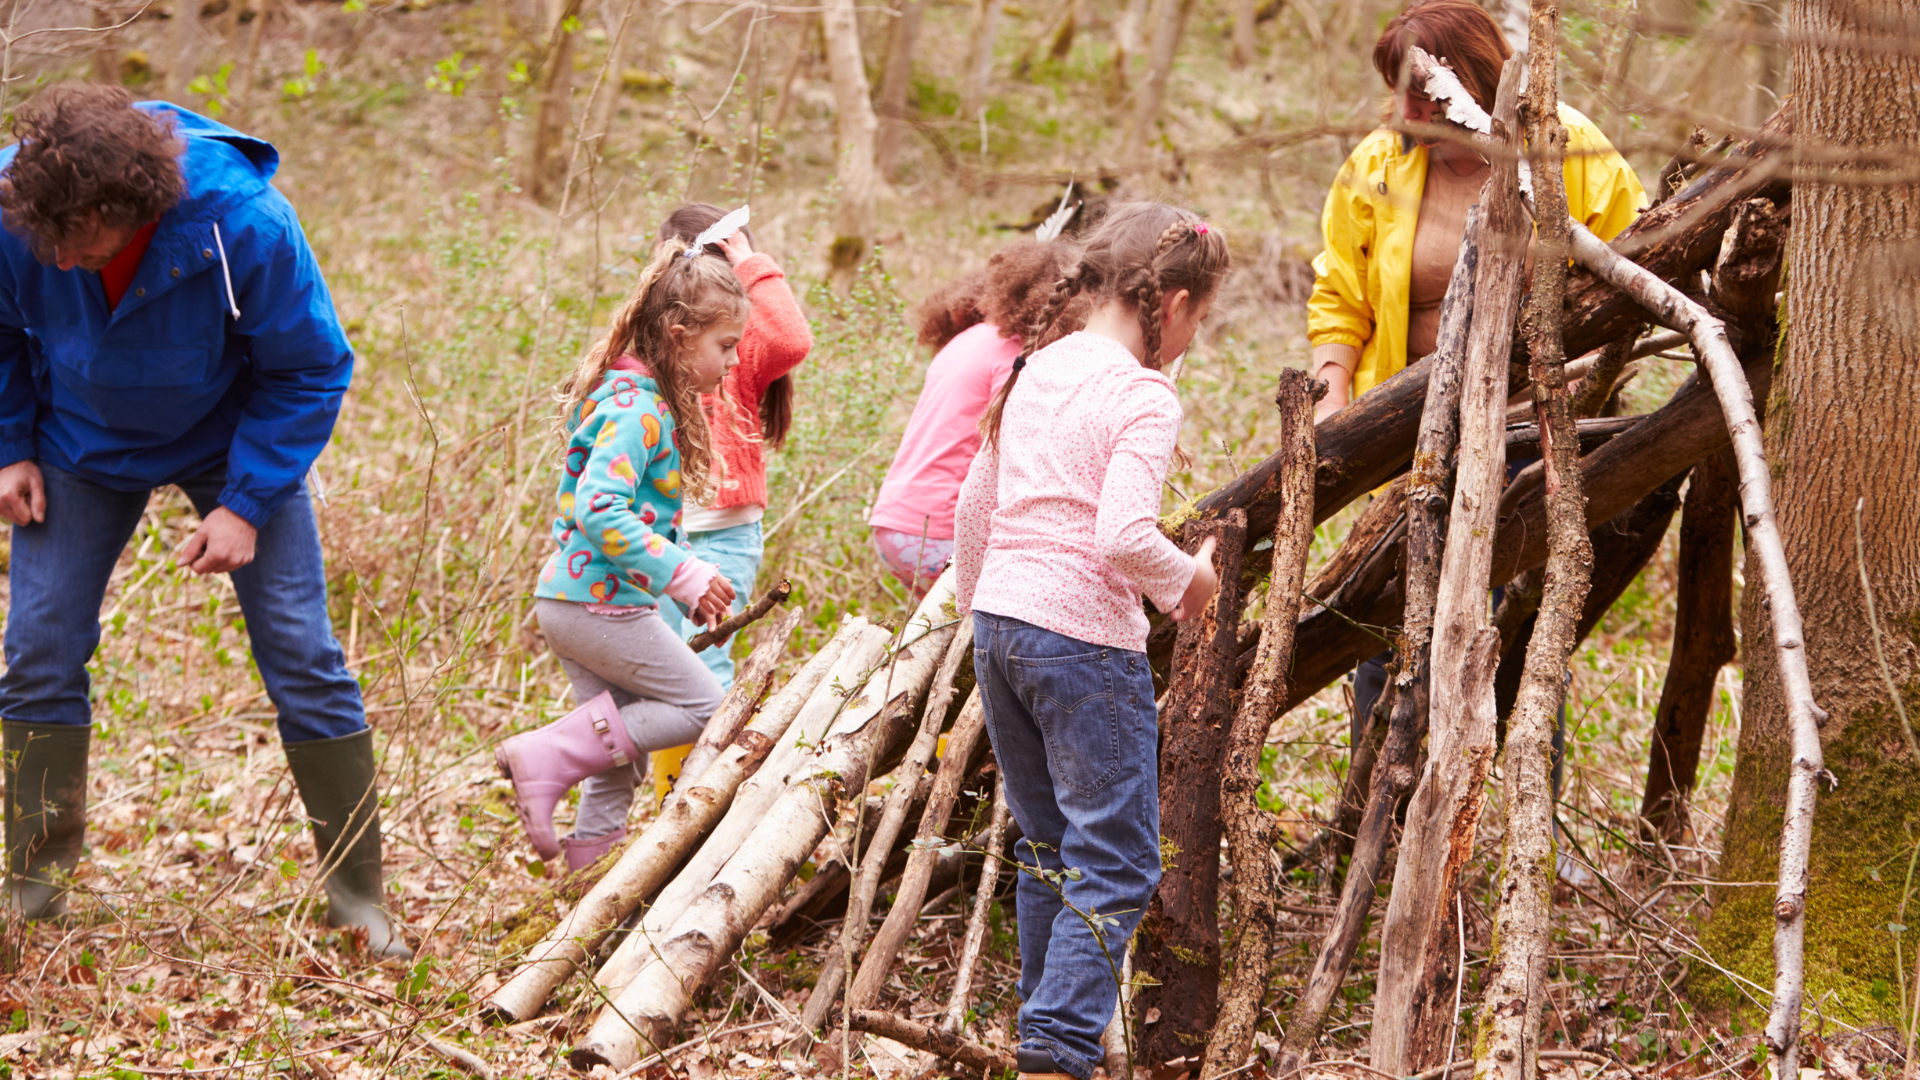 Kids learning how to build bushcraft shelter